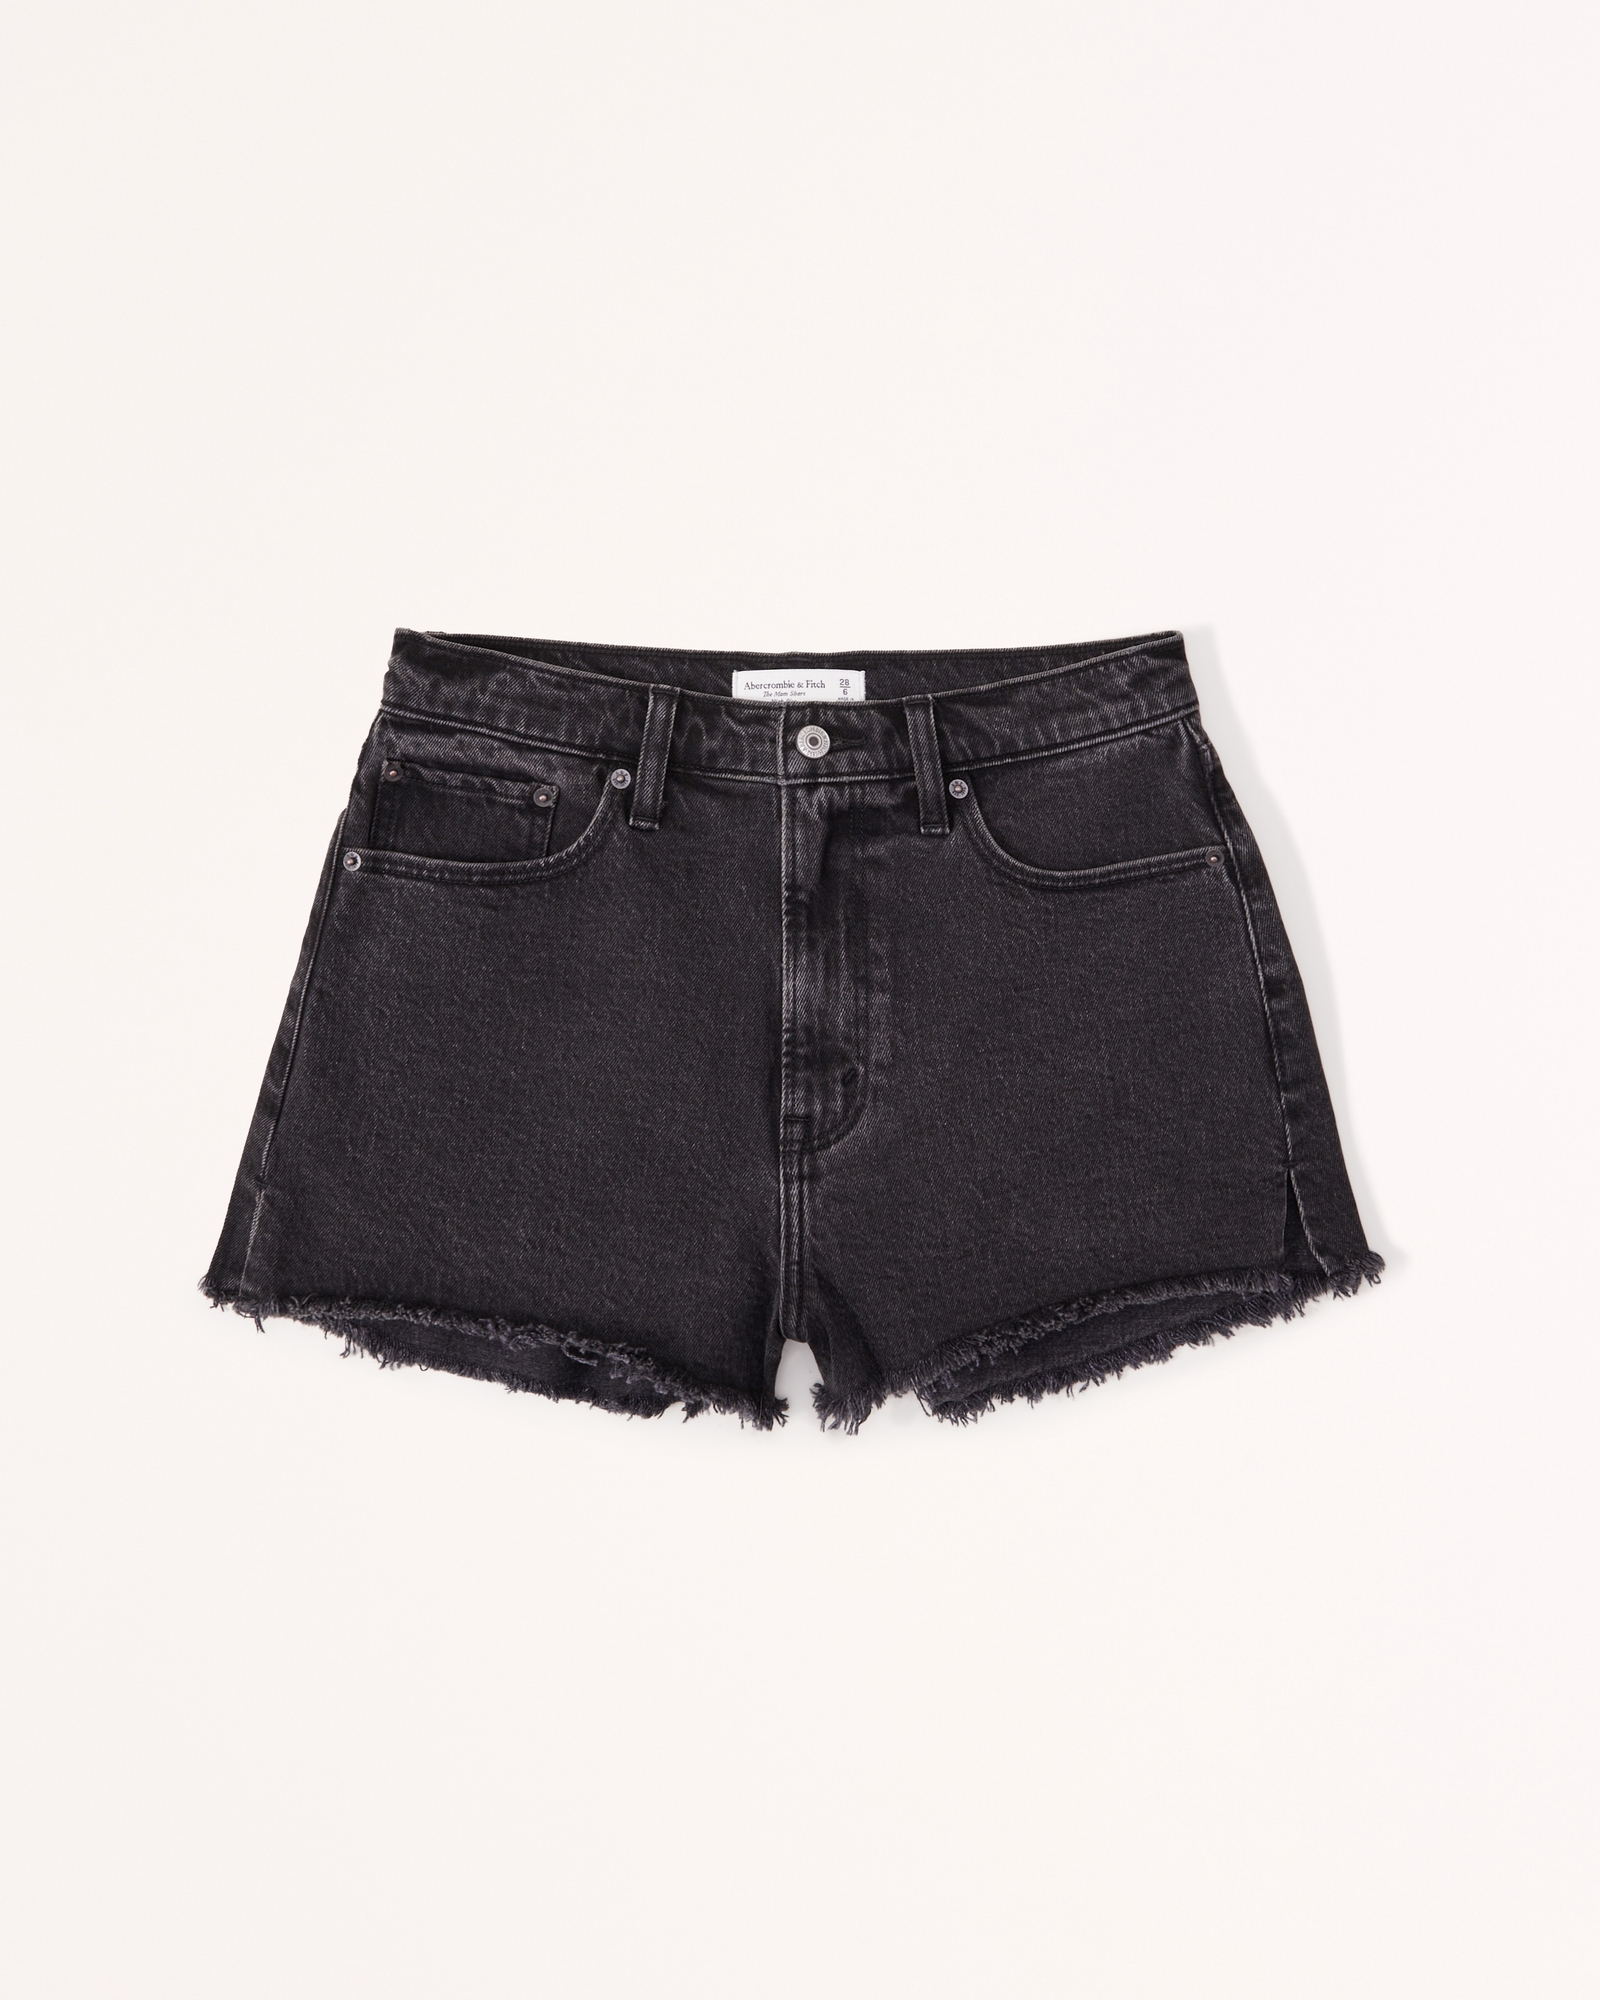 D.jeans stretchable denim shorts for women, Women's Fashion, Bottoms,  Shorts on Carousell